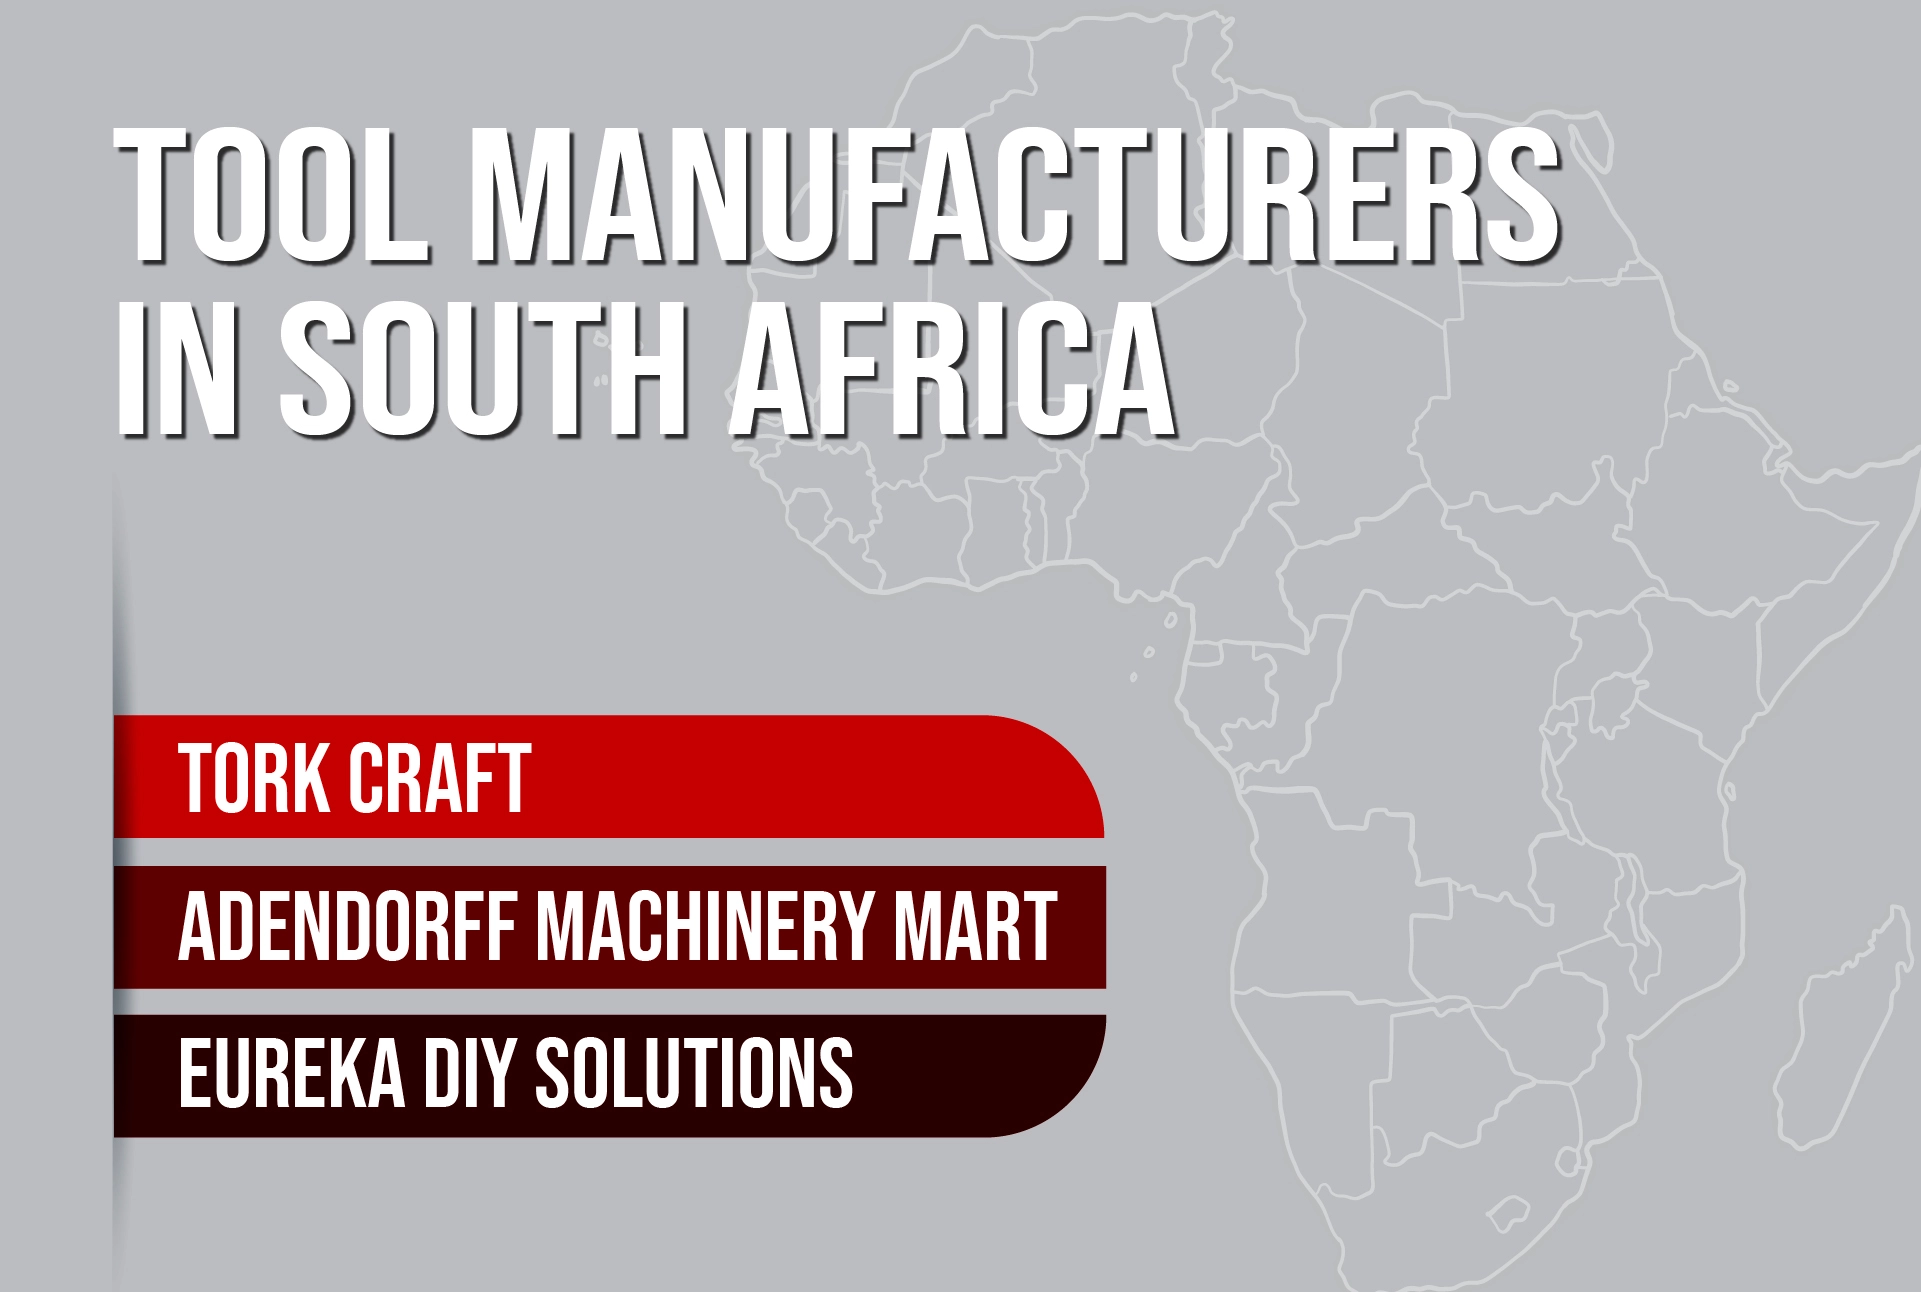 Tool Manufacturers in South Africa